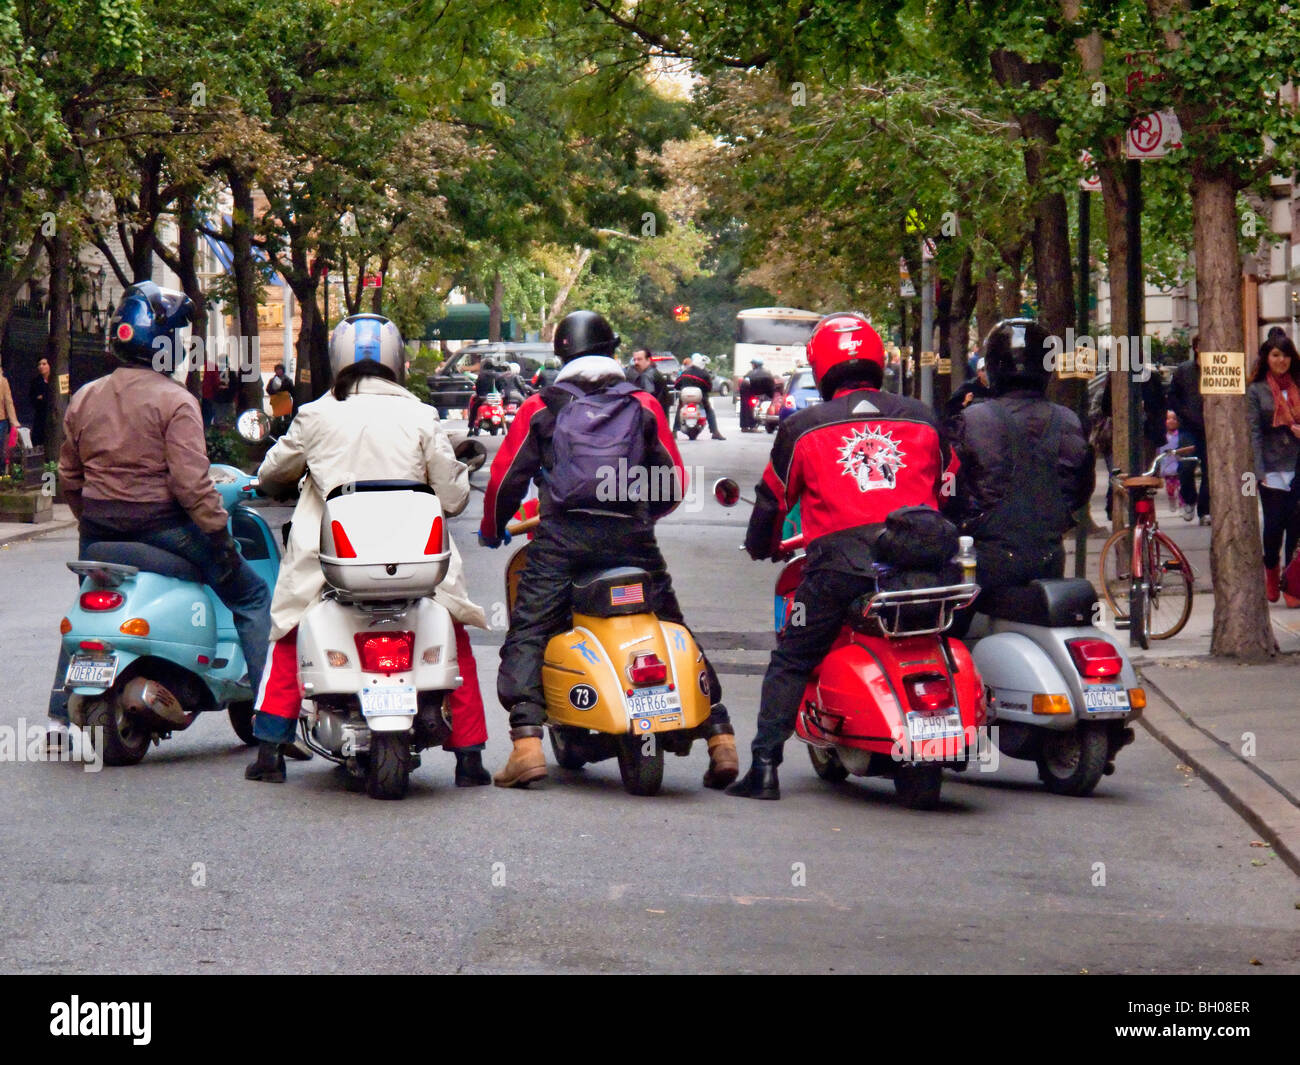 Members of a motor scooter club gather in Manhattan, New York City. Note helmets. Stock Photo